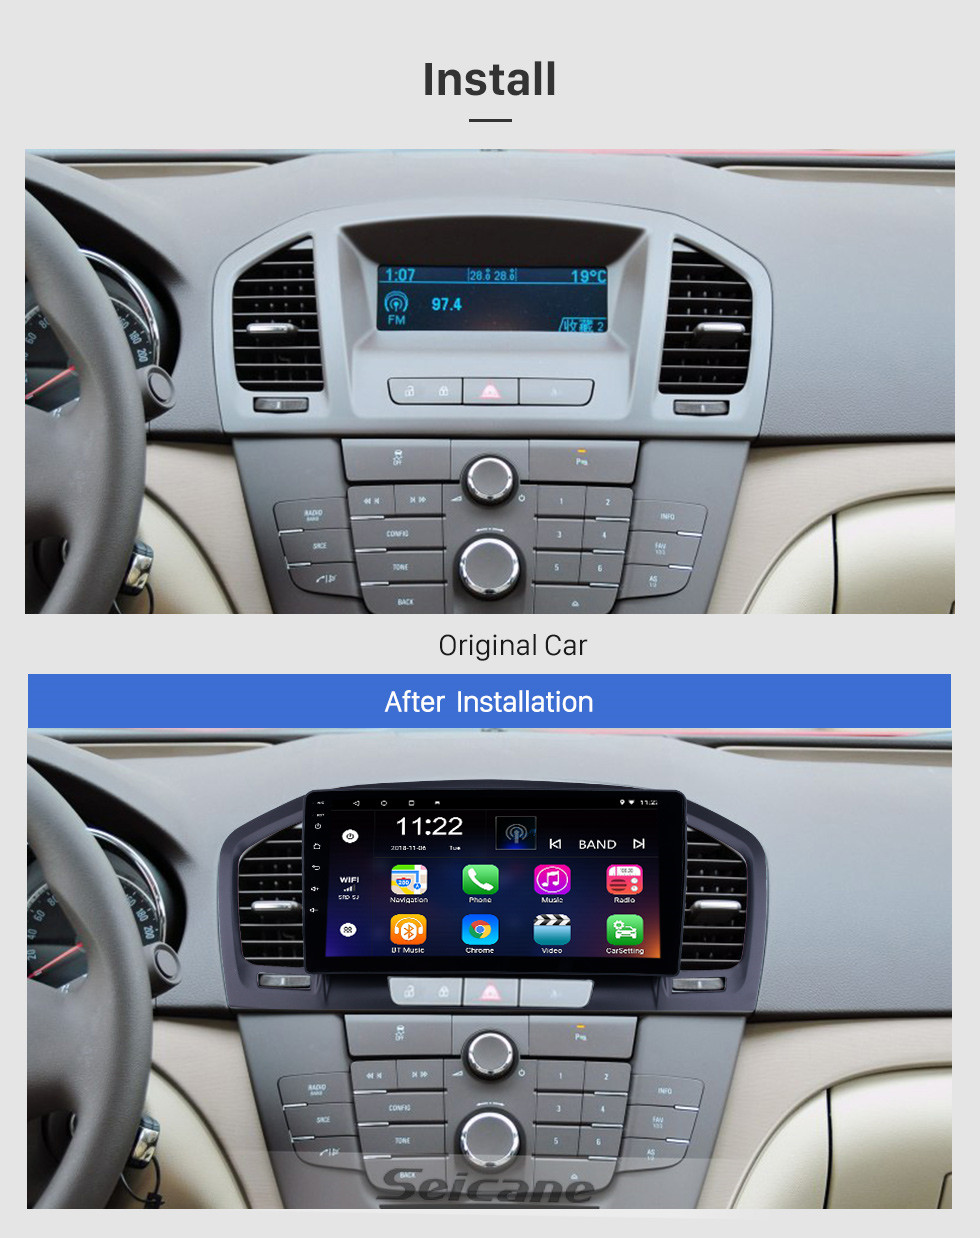 https://www.seicane.com/media/wysiwyg/80/816055/span-2009-2010-2011-2012-2013-buick-regal-gps-navigation-car-stereo-with-android-hd-touch-screen-span-H6254N_02.jpg